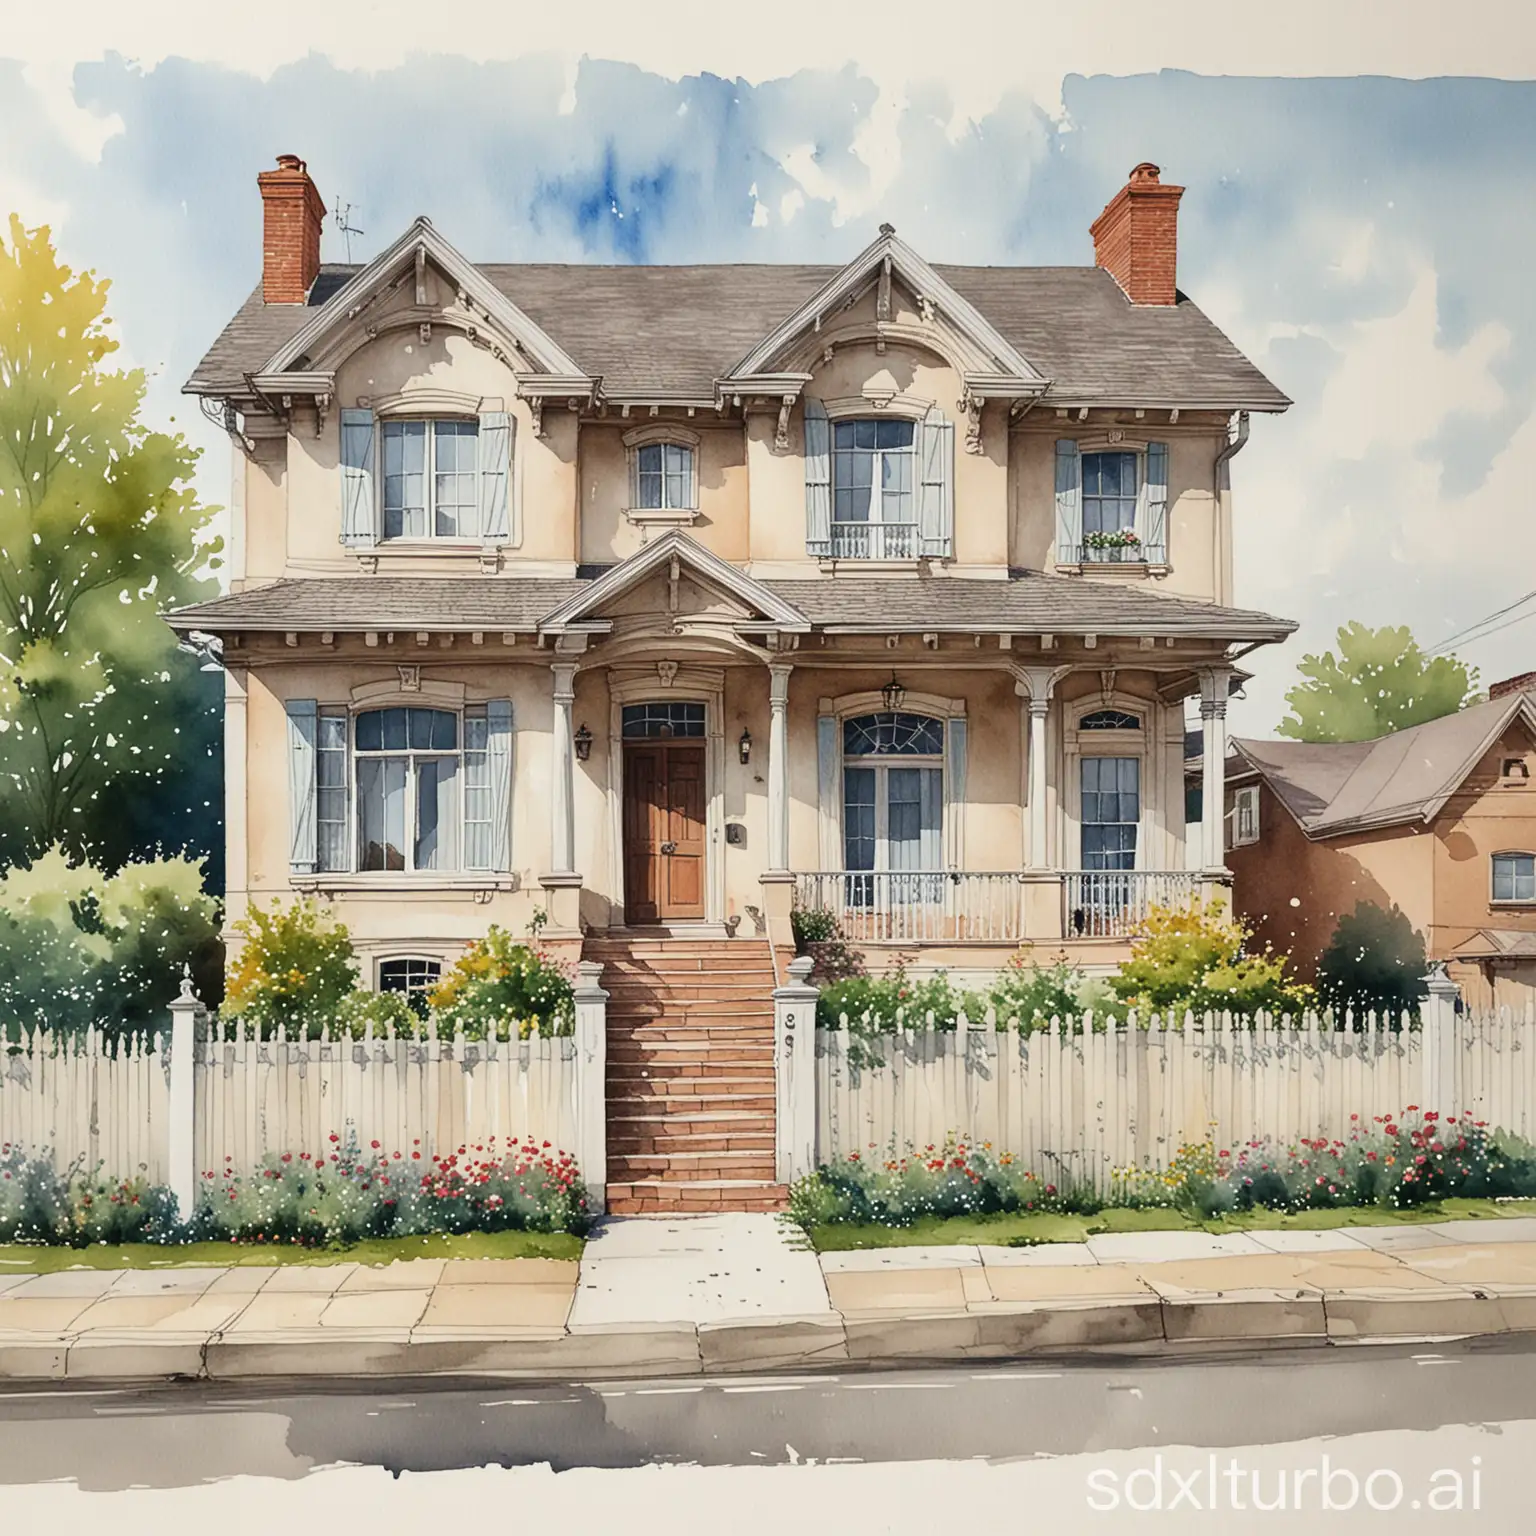 water color image of a house, architectural